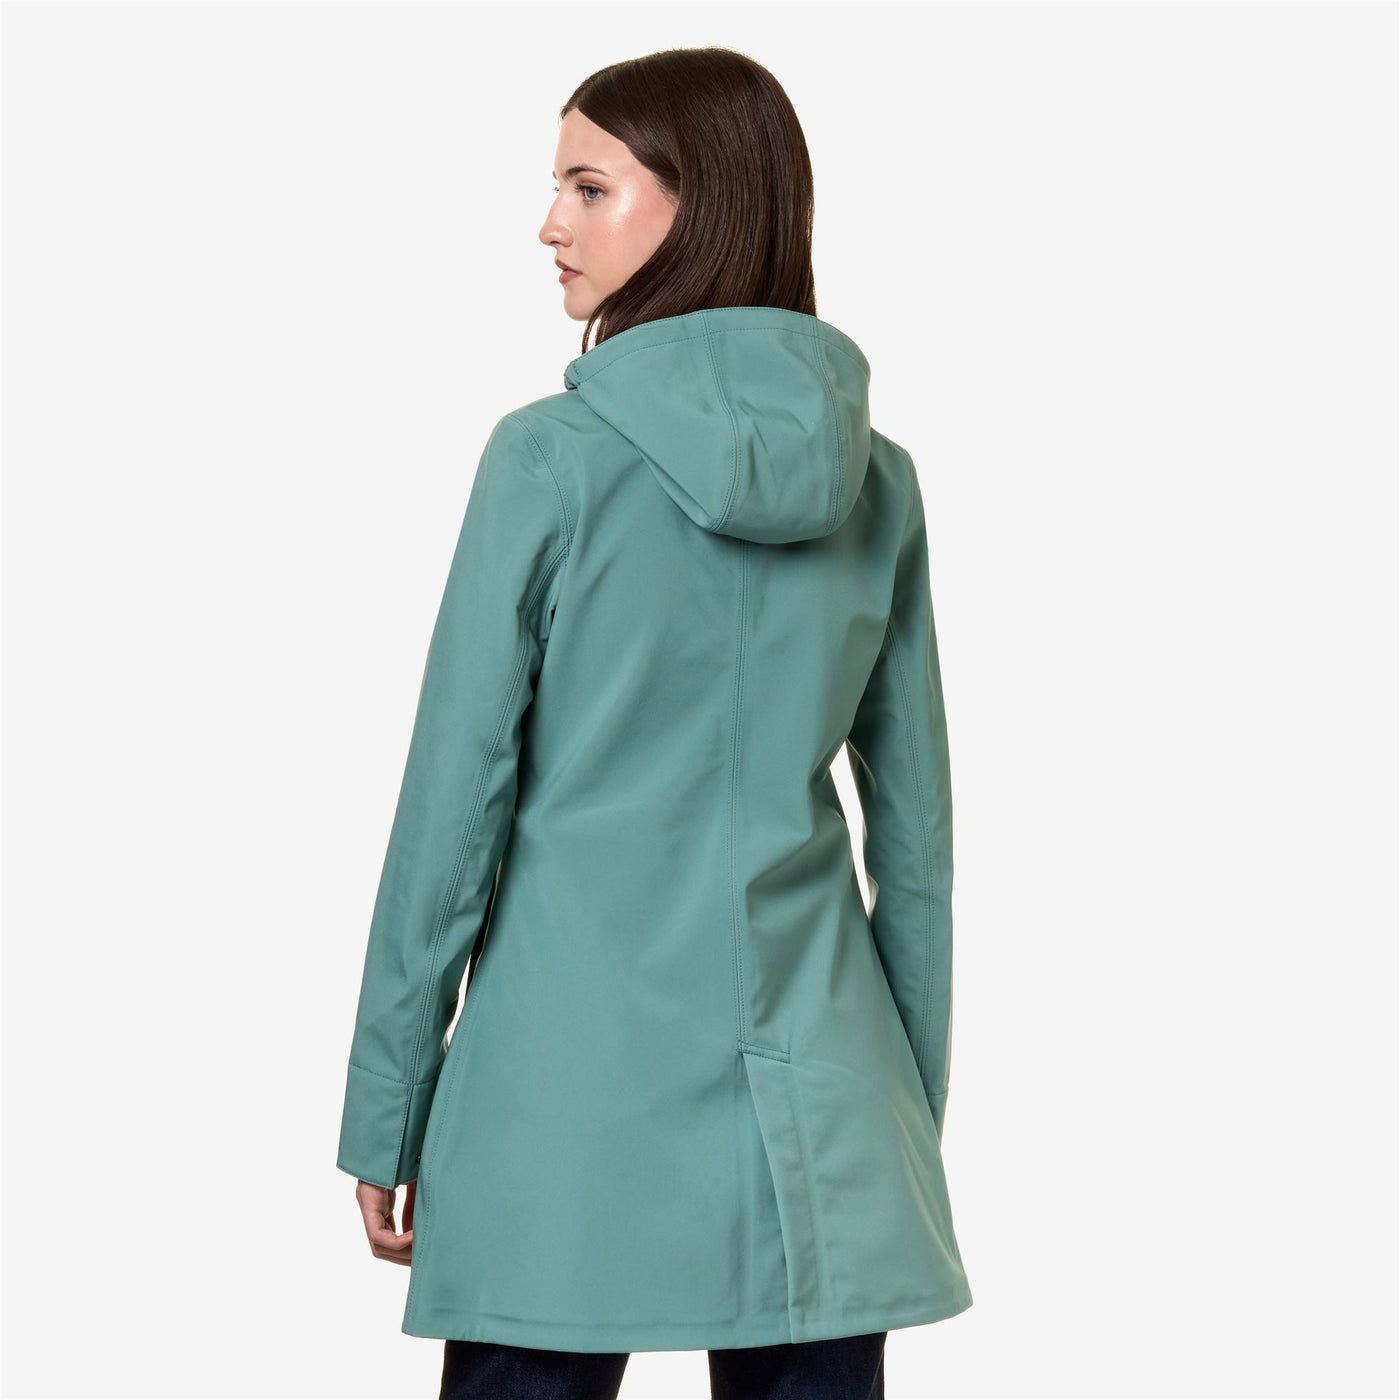 Jackets Woman MATHY BONDED 3/4 Length GREEN A-BLUE D Dressed Front Double		